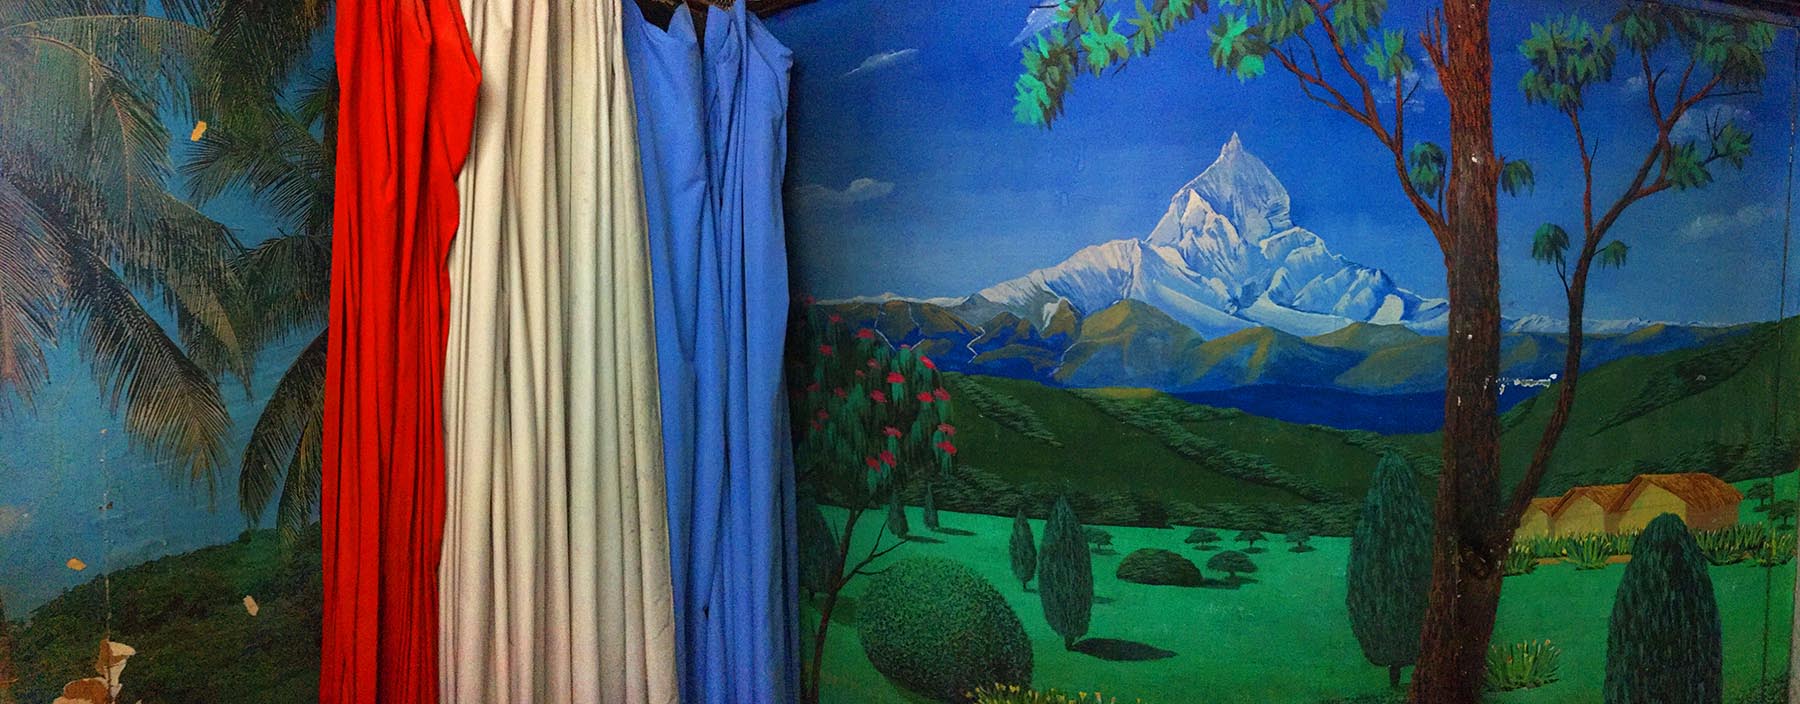 Photograph of a mural featuring a mountain.